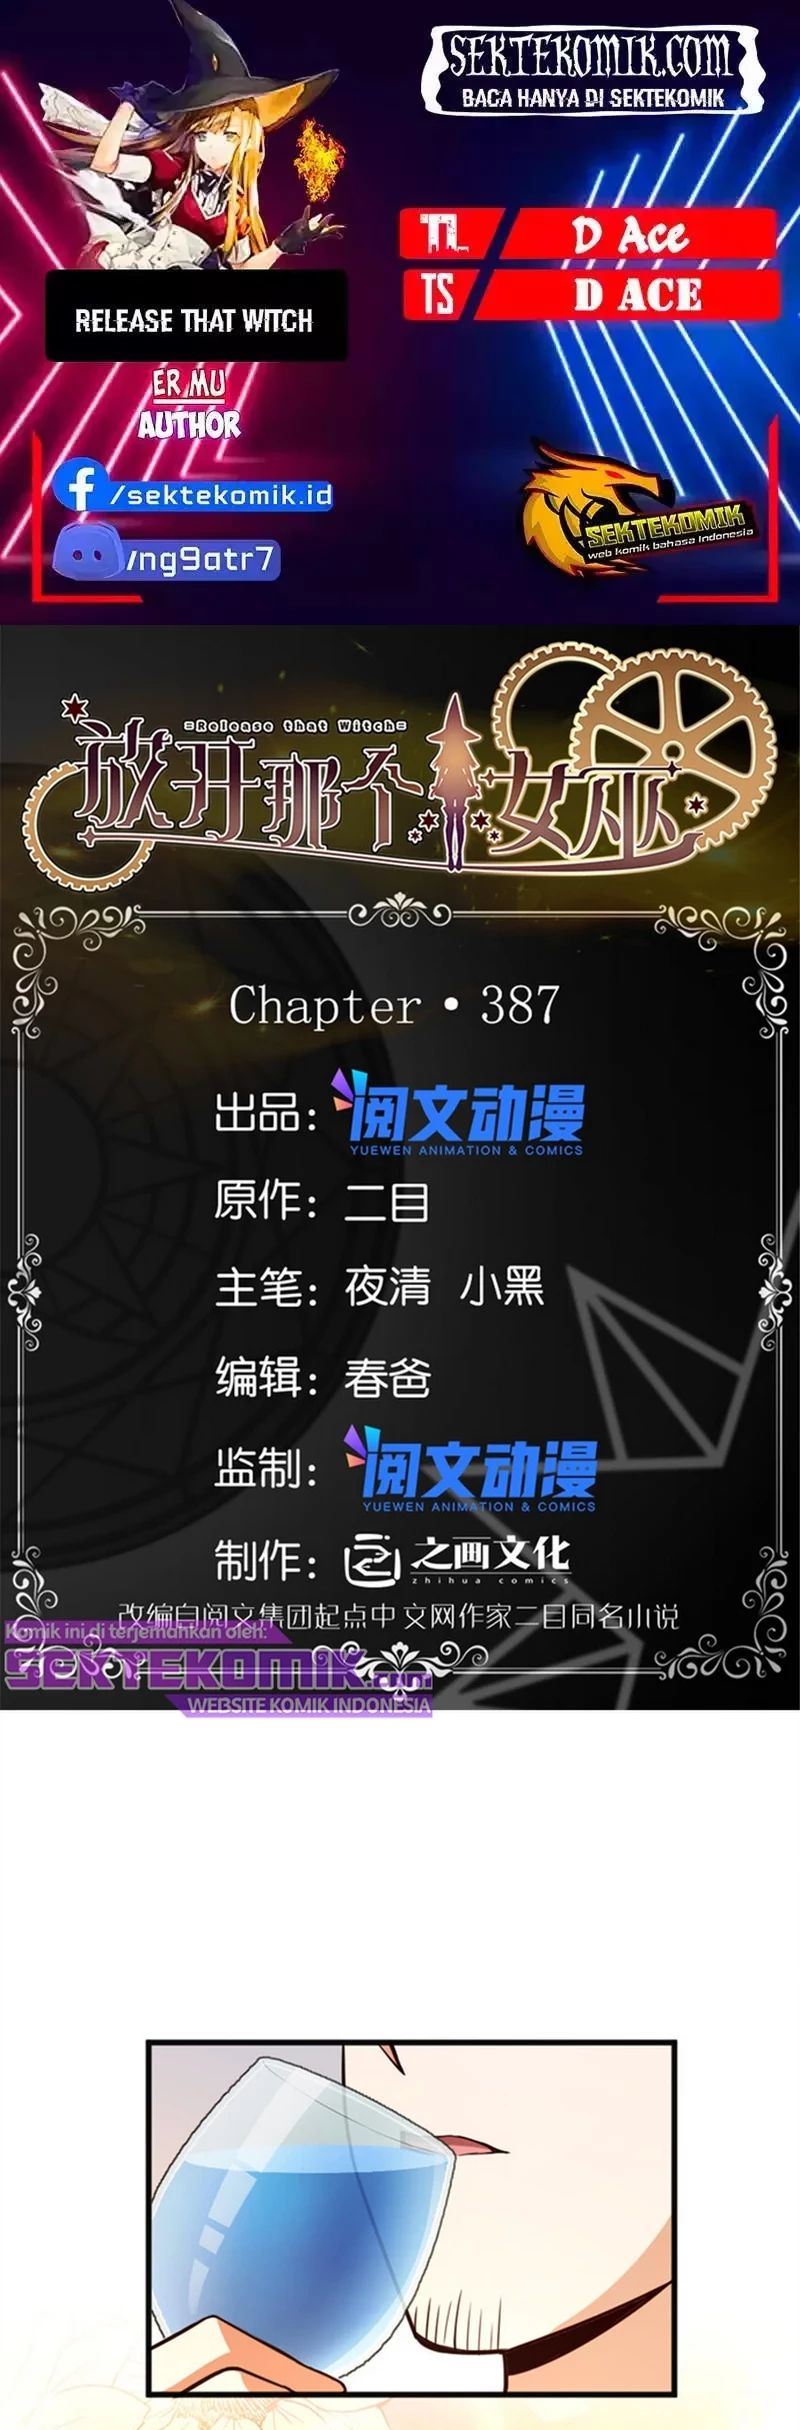 Release That Witch Chapter 387